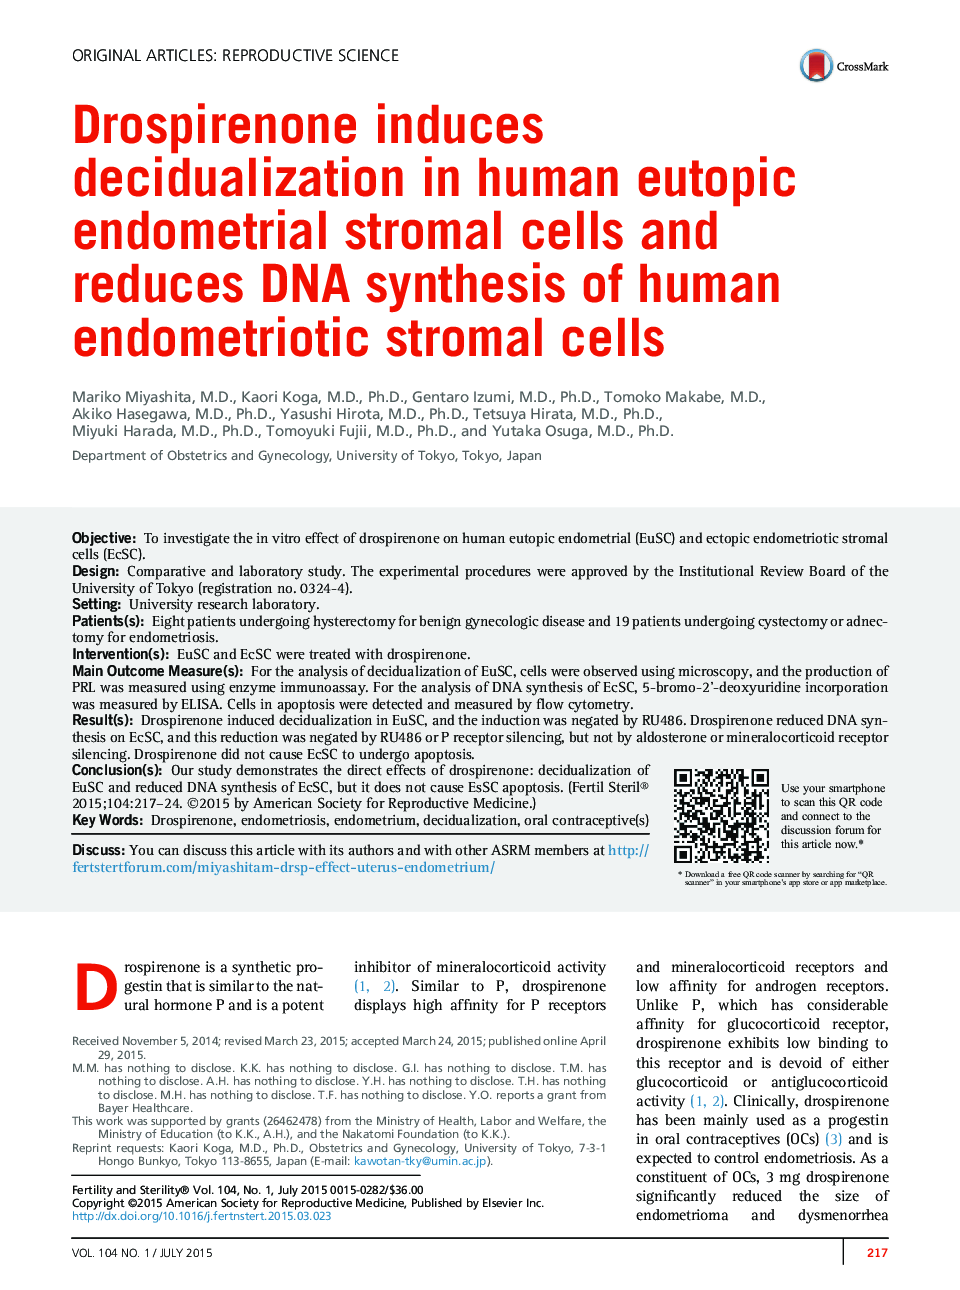 Drospirenone induces decidualization in human eutopic endometrial stromal cells and reduces DNA synthesis of human endometriotic stromal cells